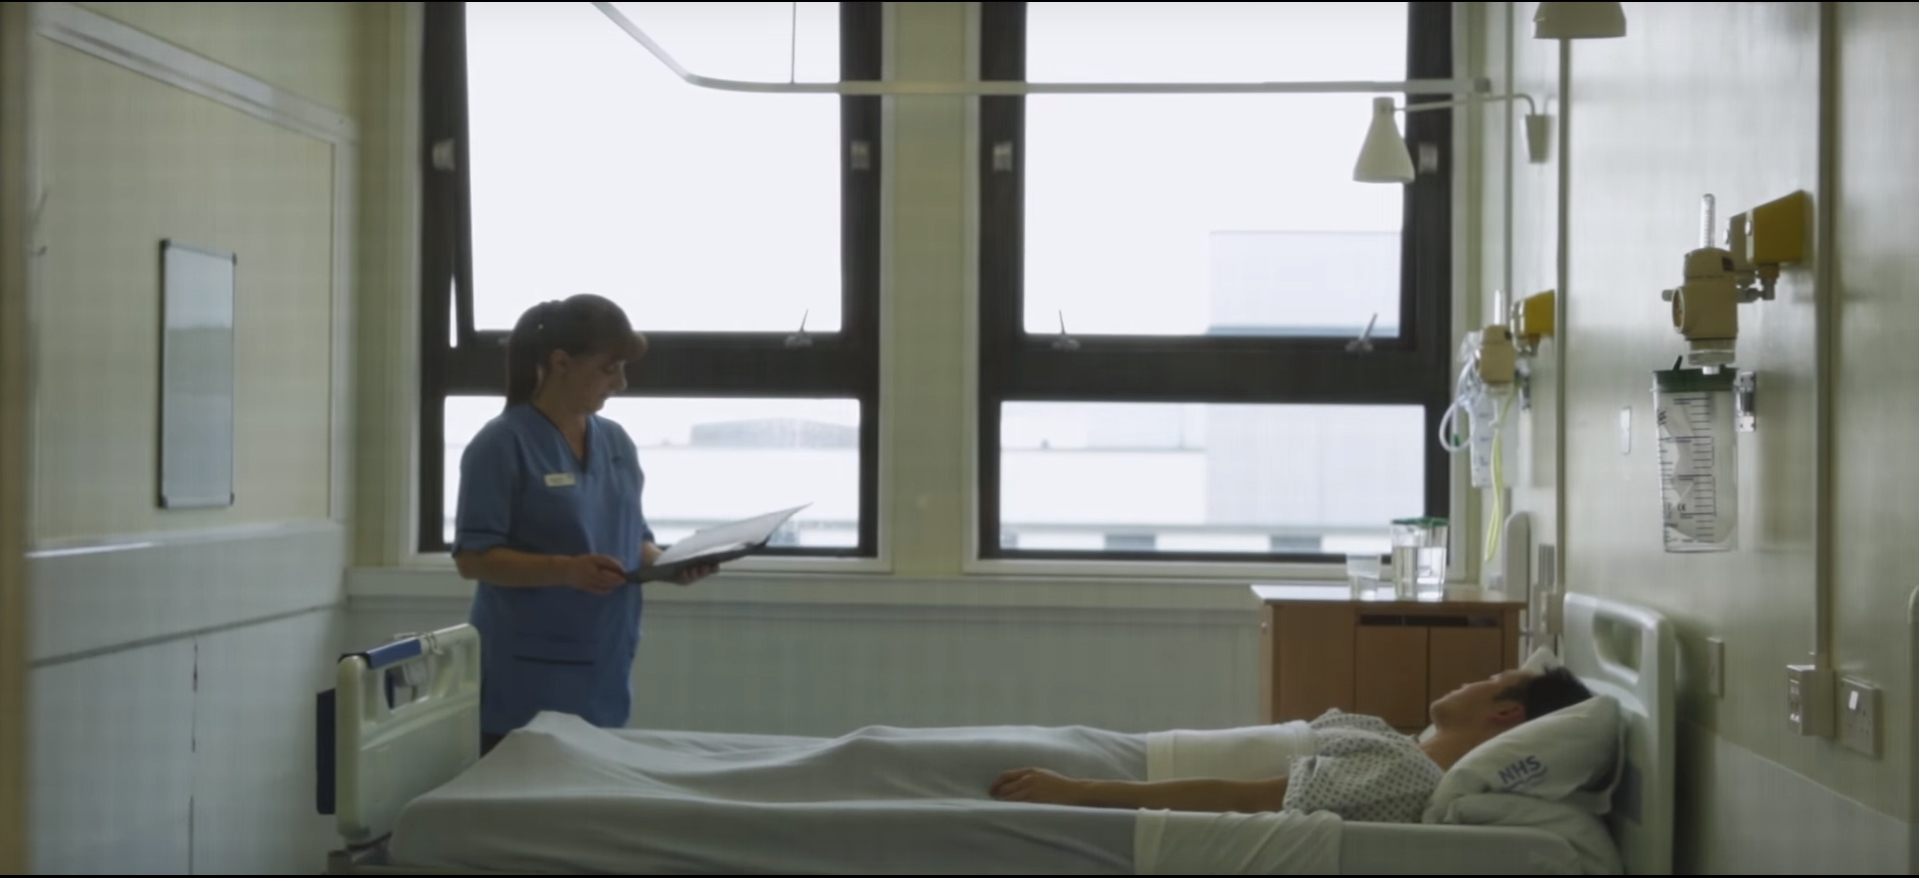 Background image showing nurse by the bedside